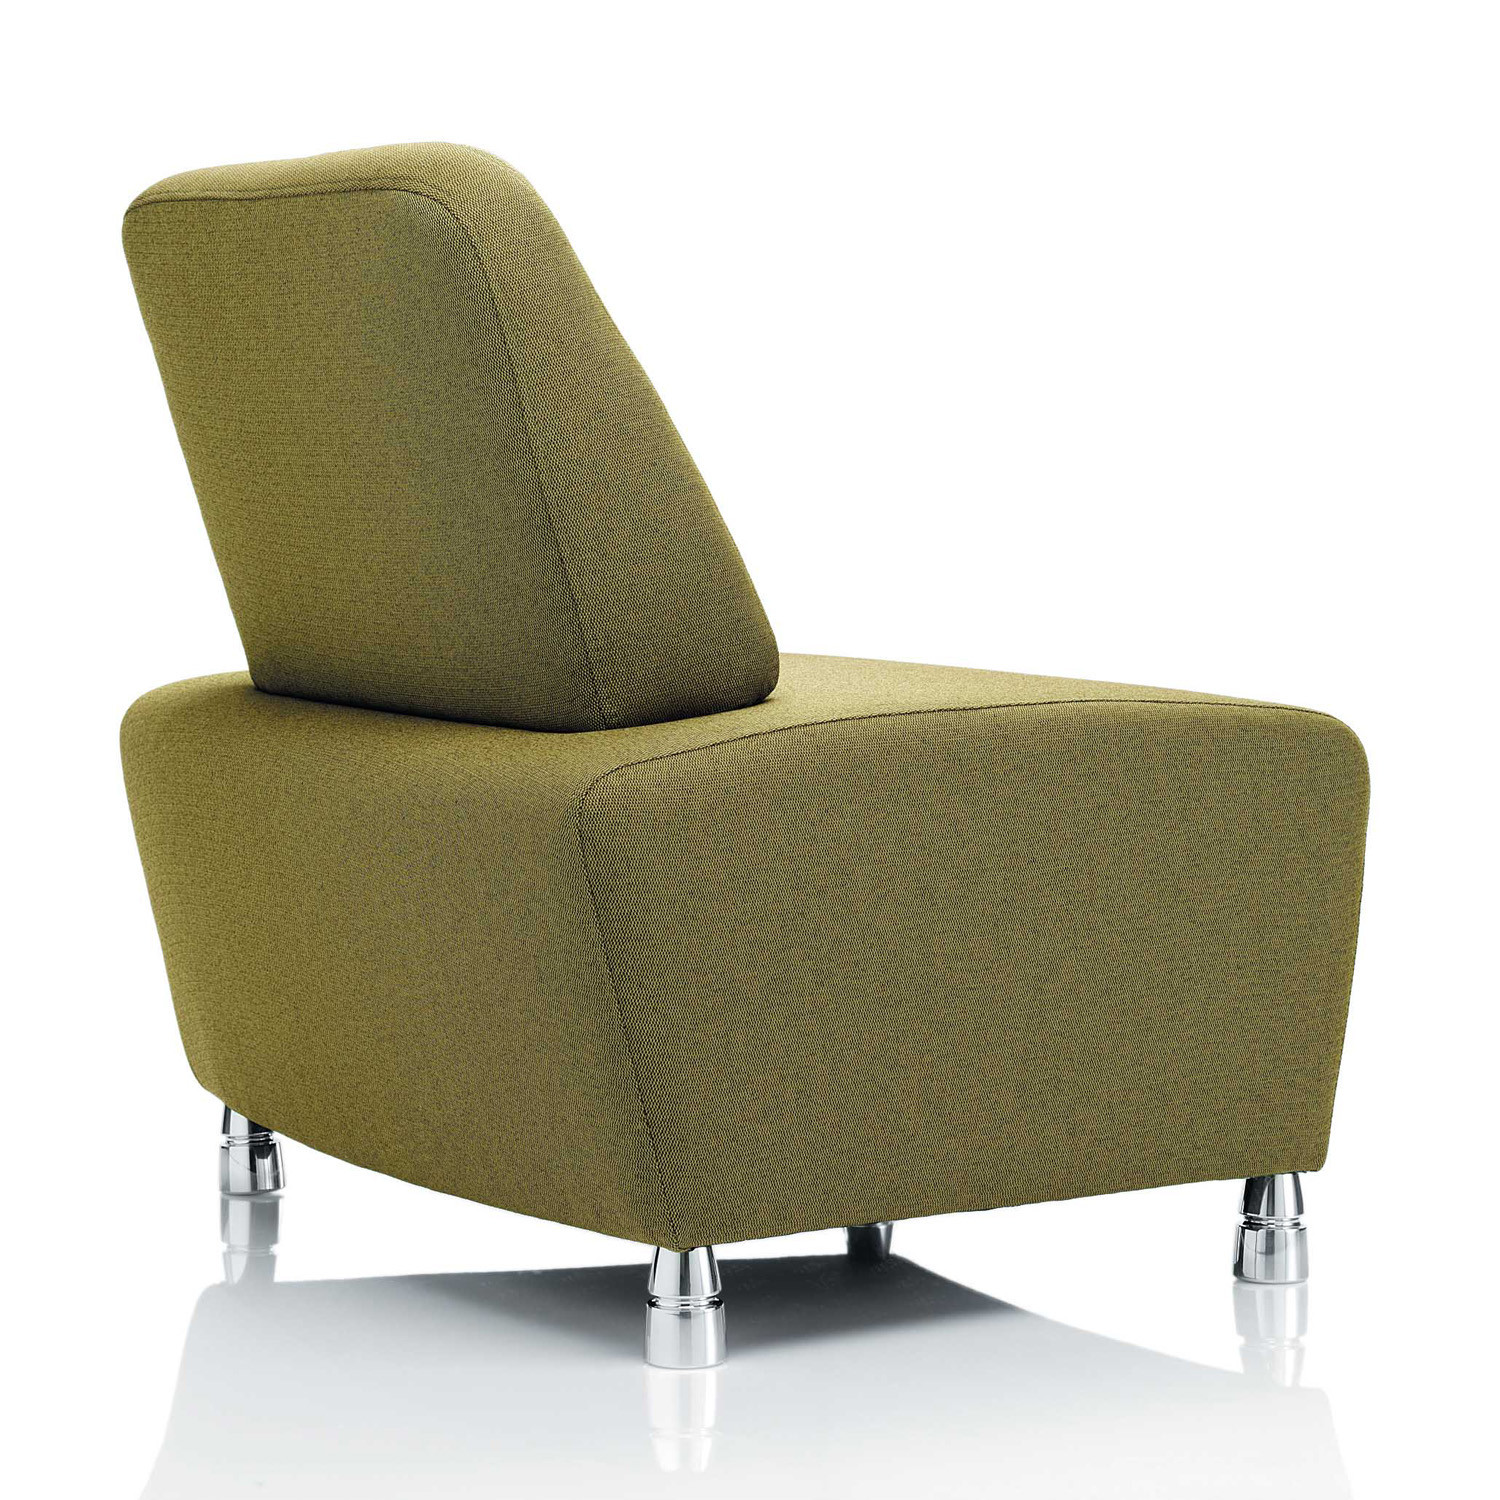 Adda Soft Seating with backrest